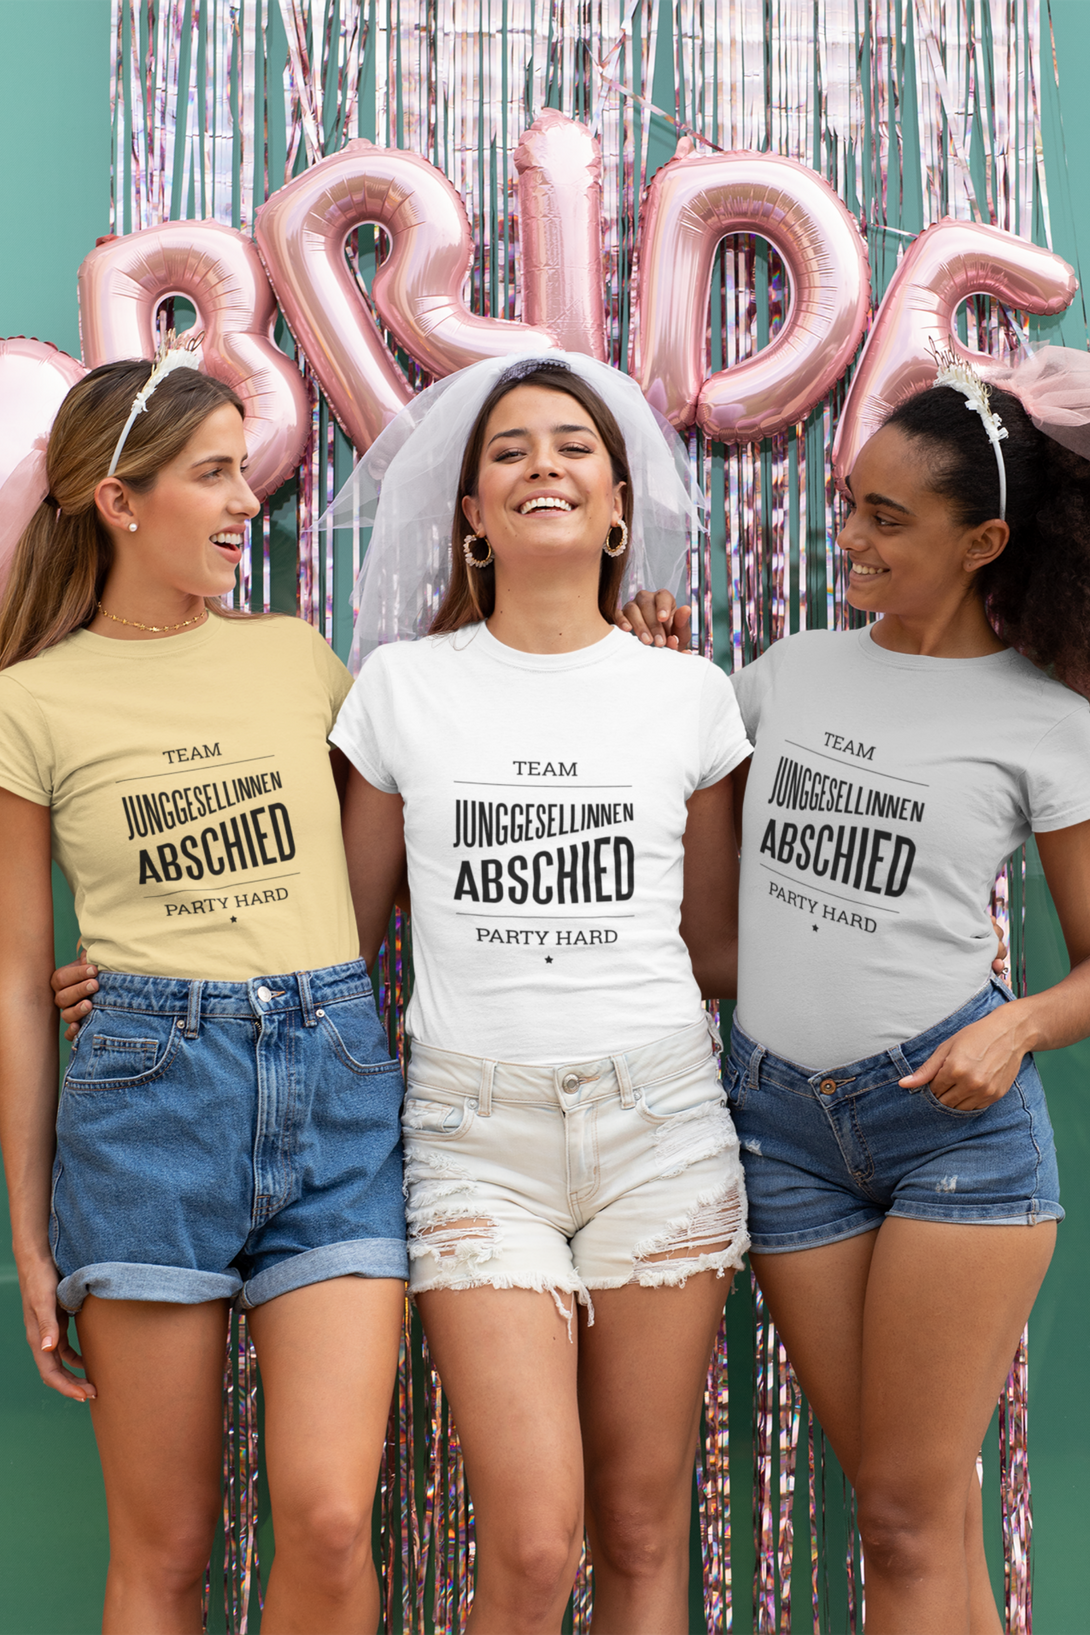 German Bachelor Party Printed T-Shirt For Women - WowWaves - 2